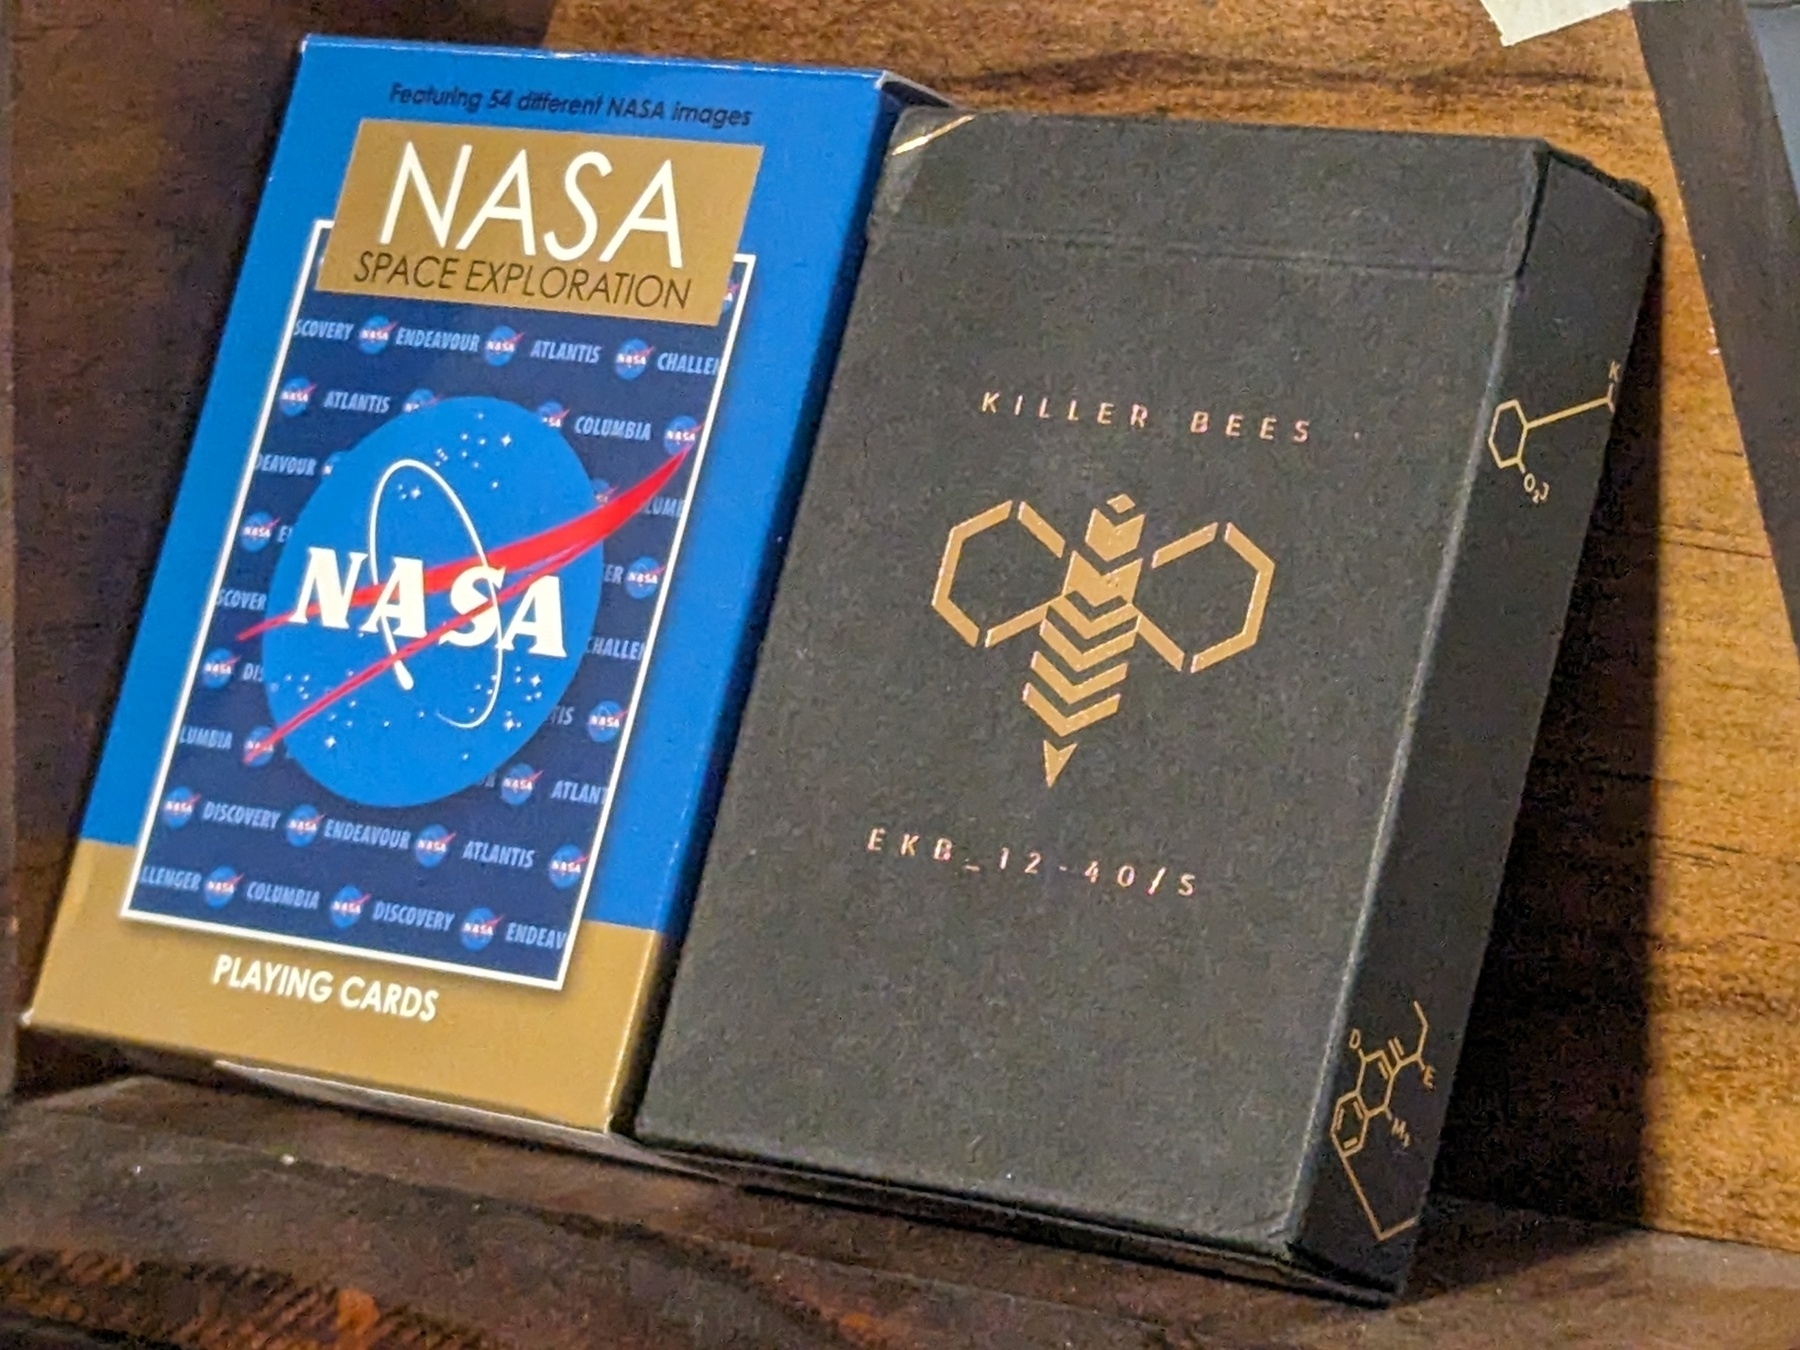 Two playing card decks in their boxes. One is NASA themed, the other is killer bees themed.